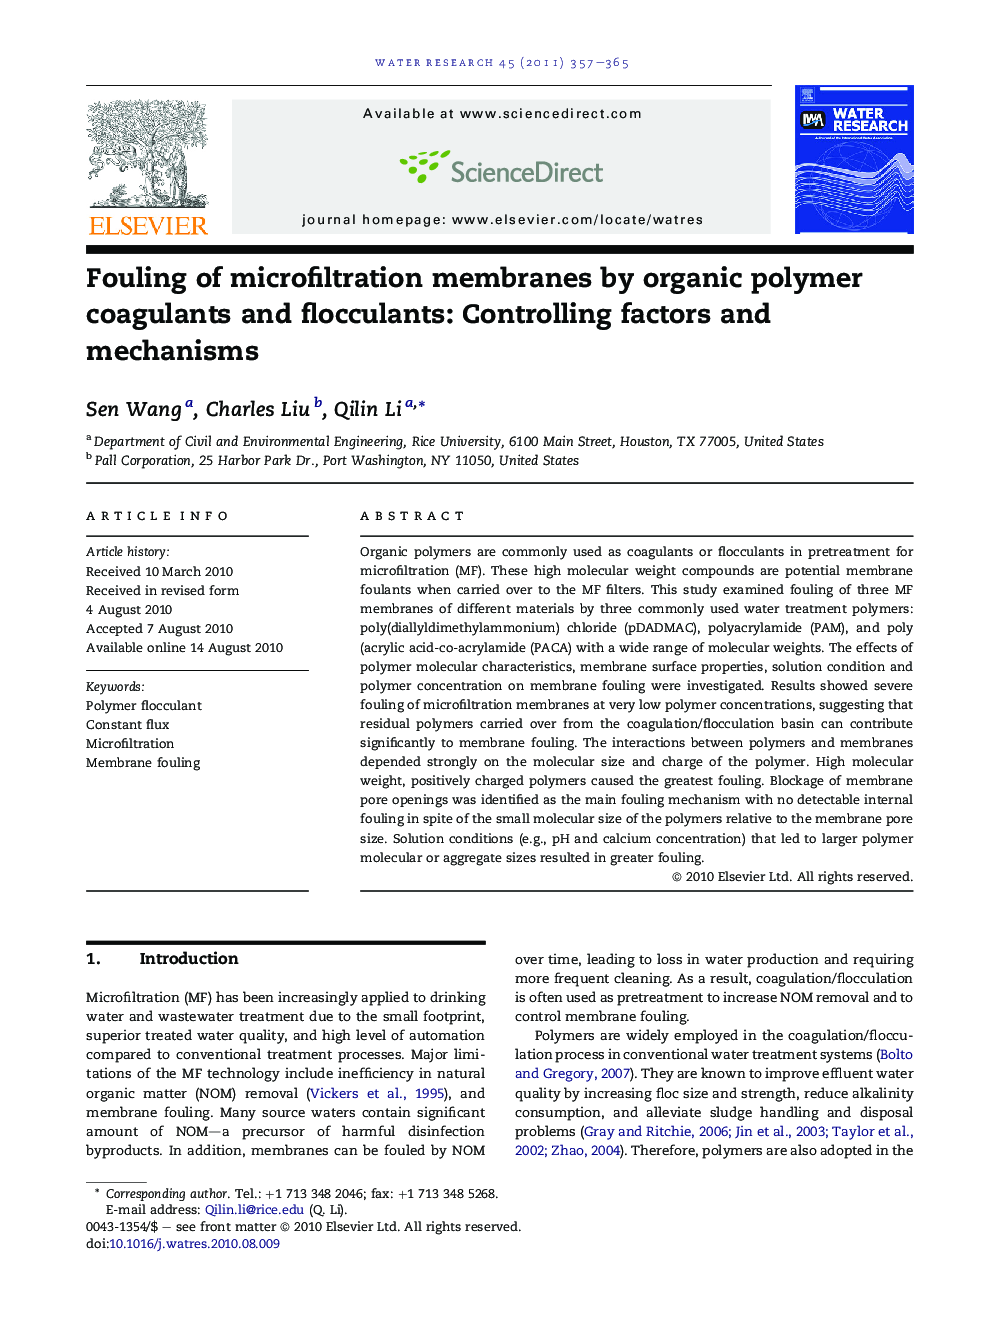 Fouling of microfiltration membranes by organic polymer coagulants and flocculants: Controlling factors and mechanisms